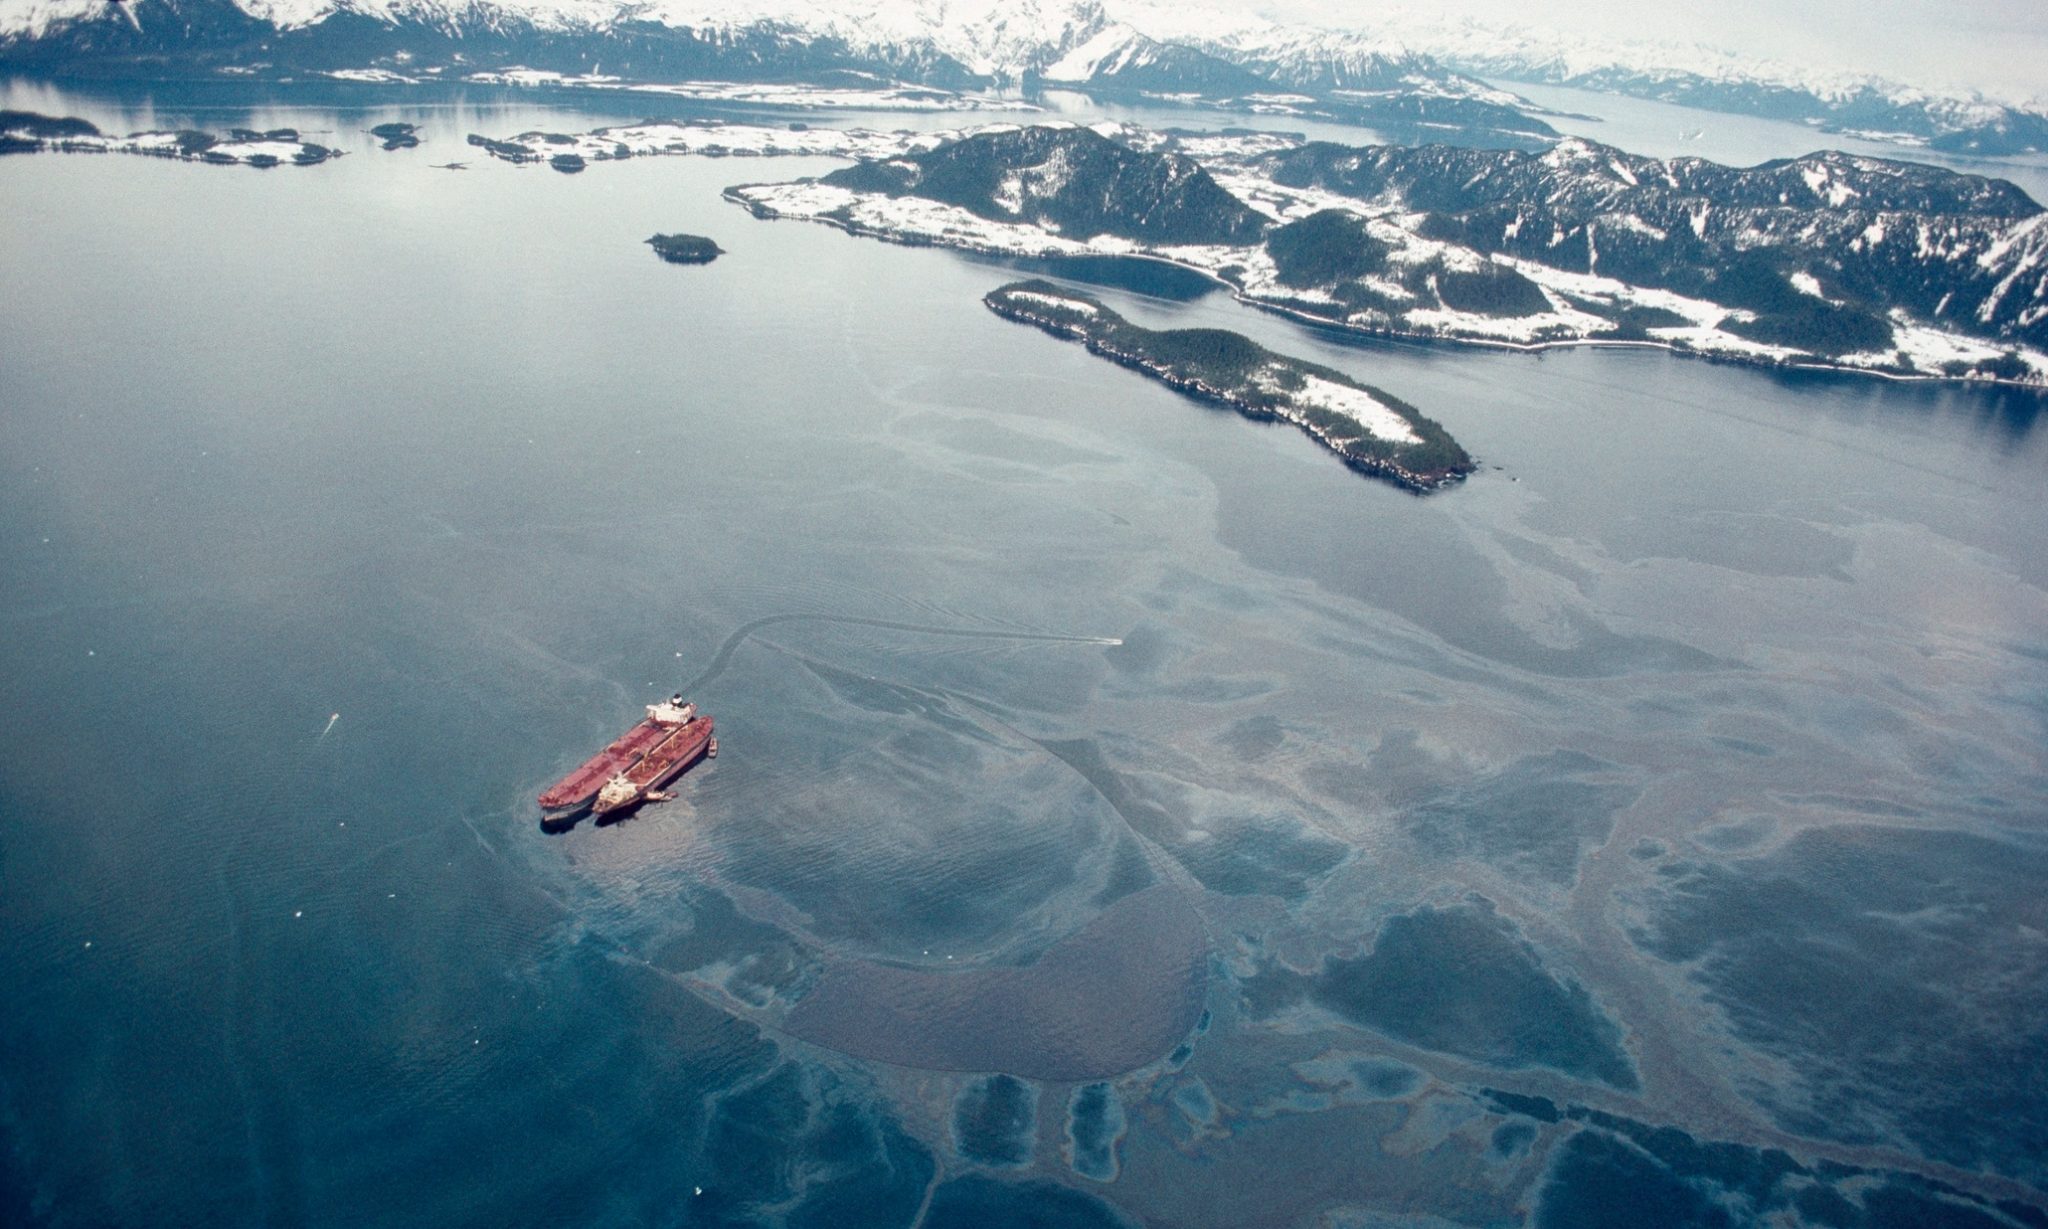 Blast from the past: Exxon Valdez Oil Spill Disaster - SAFETY4SEA